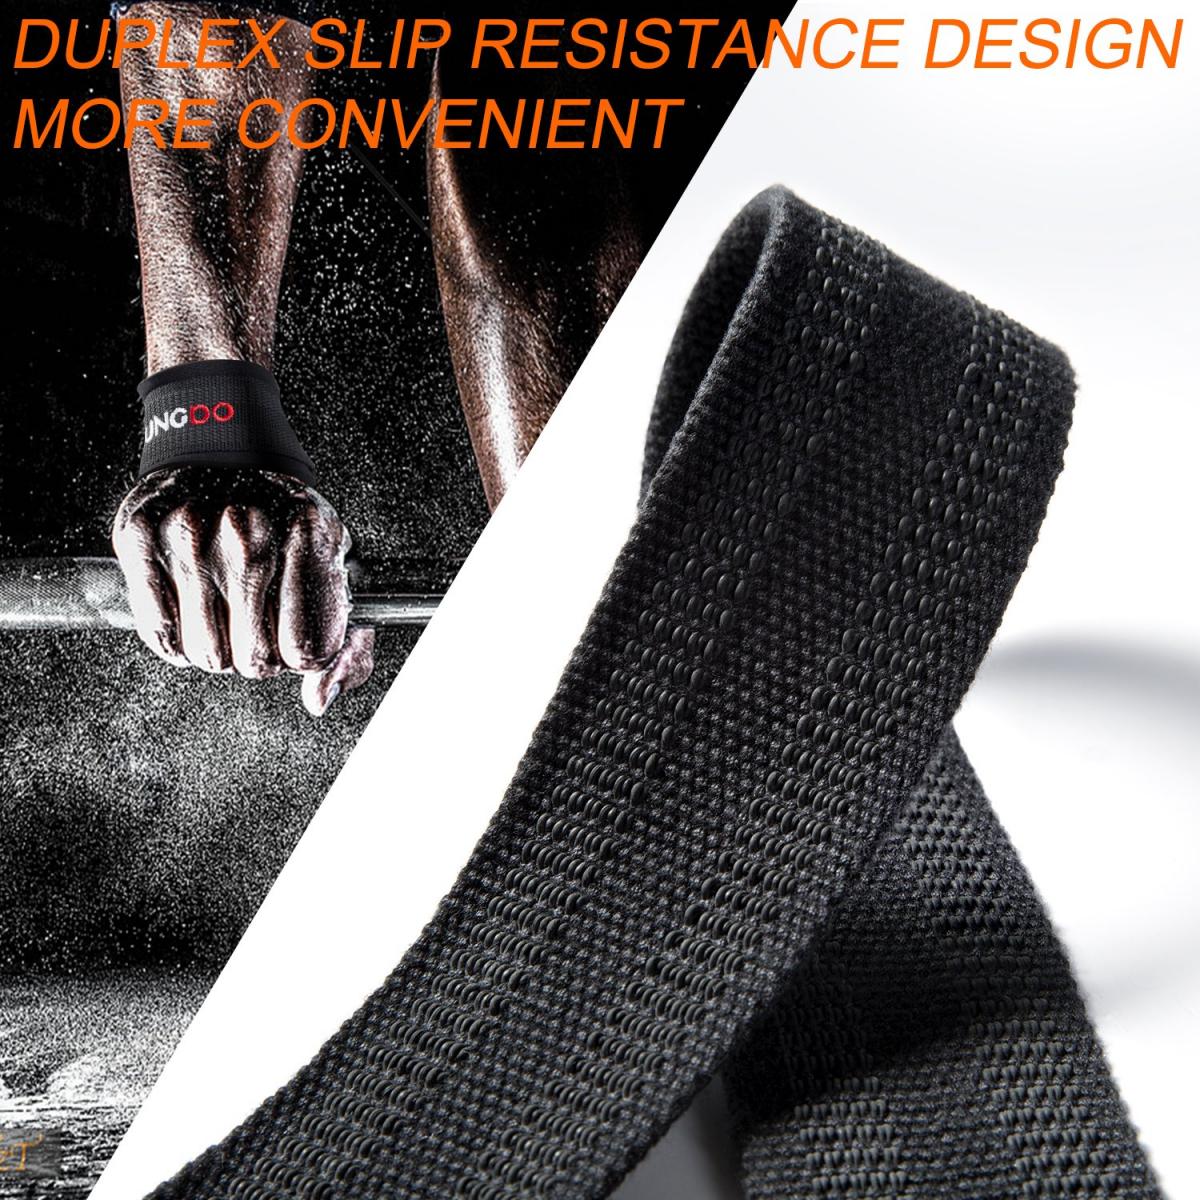 Wrist Straps For Weight Lifting - Lifting Straps For Weightlifting,gym Wrist  Wraps With Extra Hand Grips Support For Strength Training,bodybuilding,de